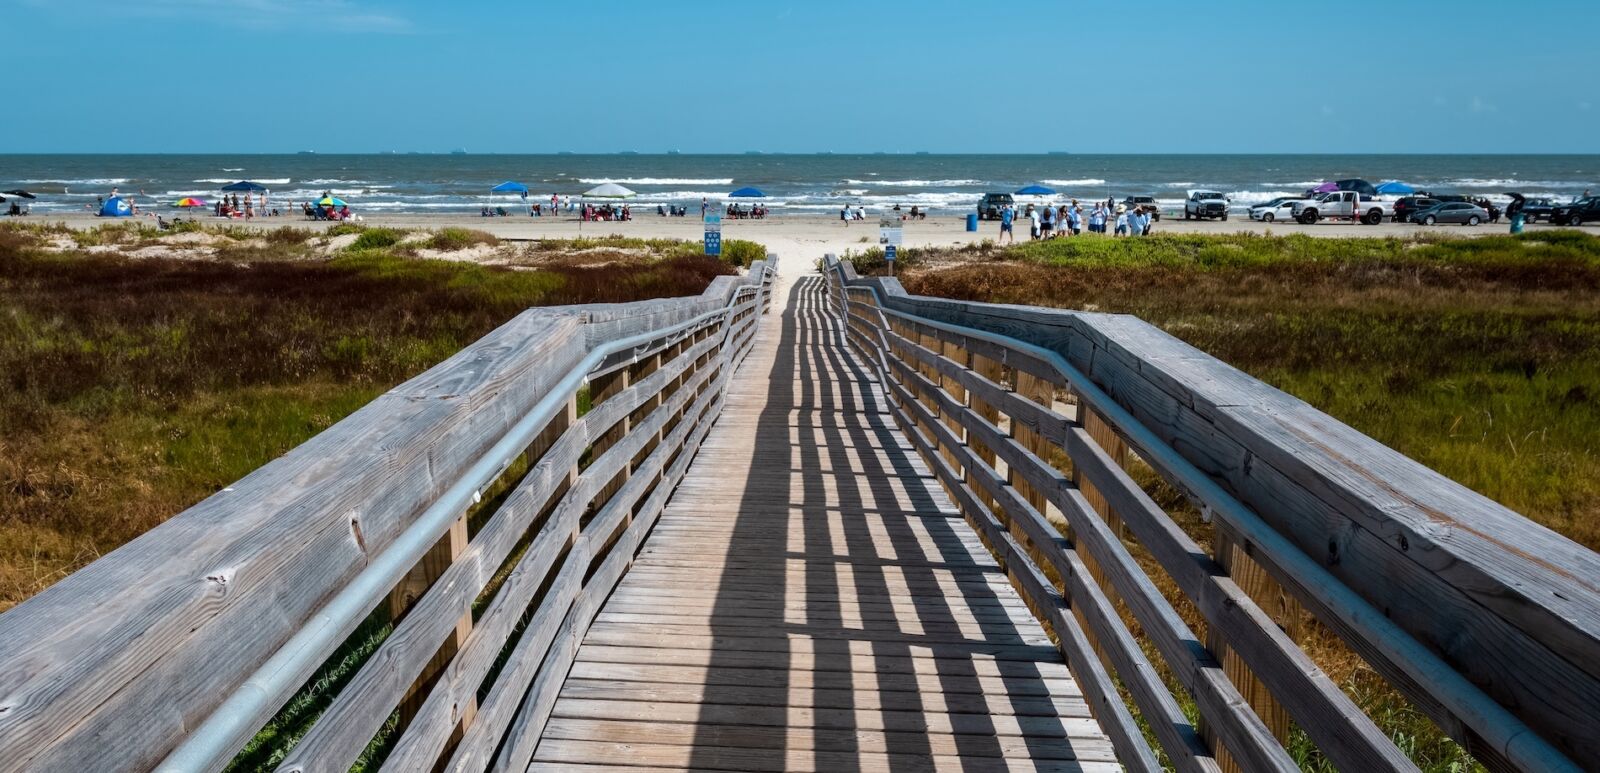 Most Underrated Beaches in America